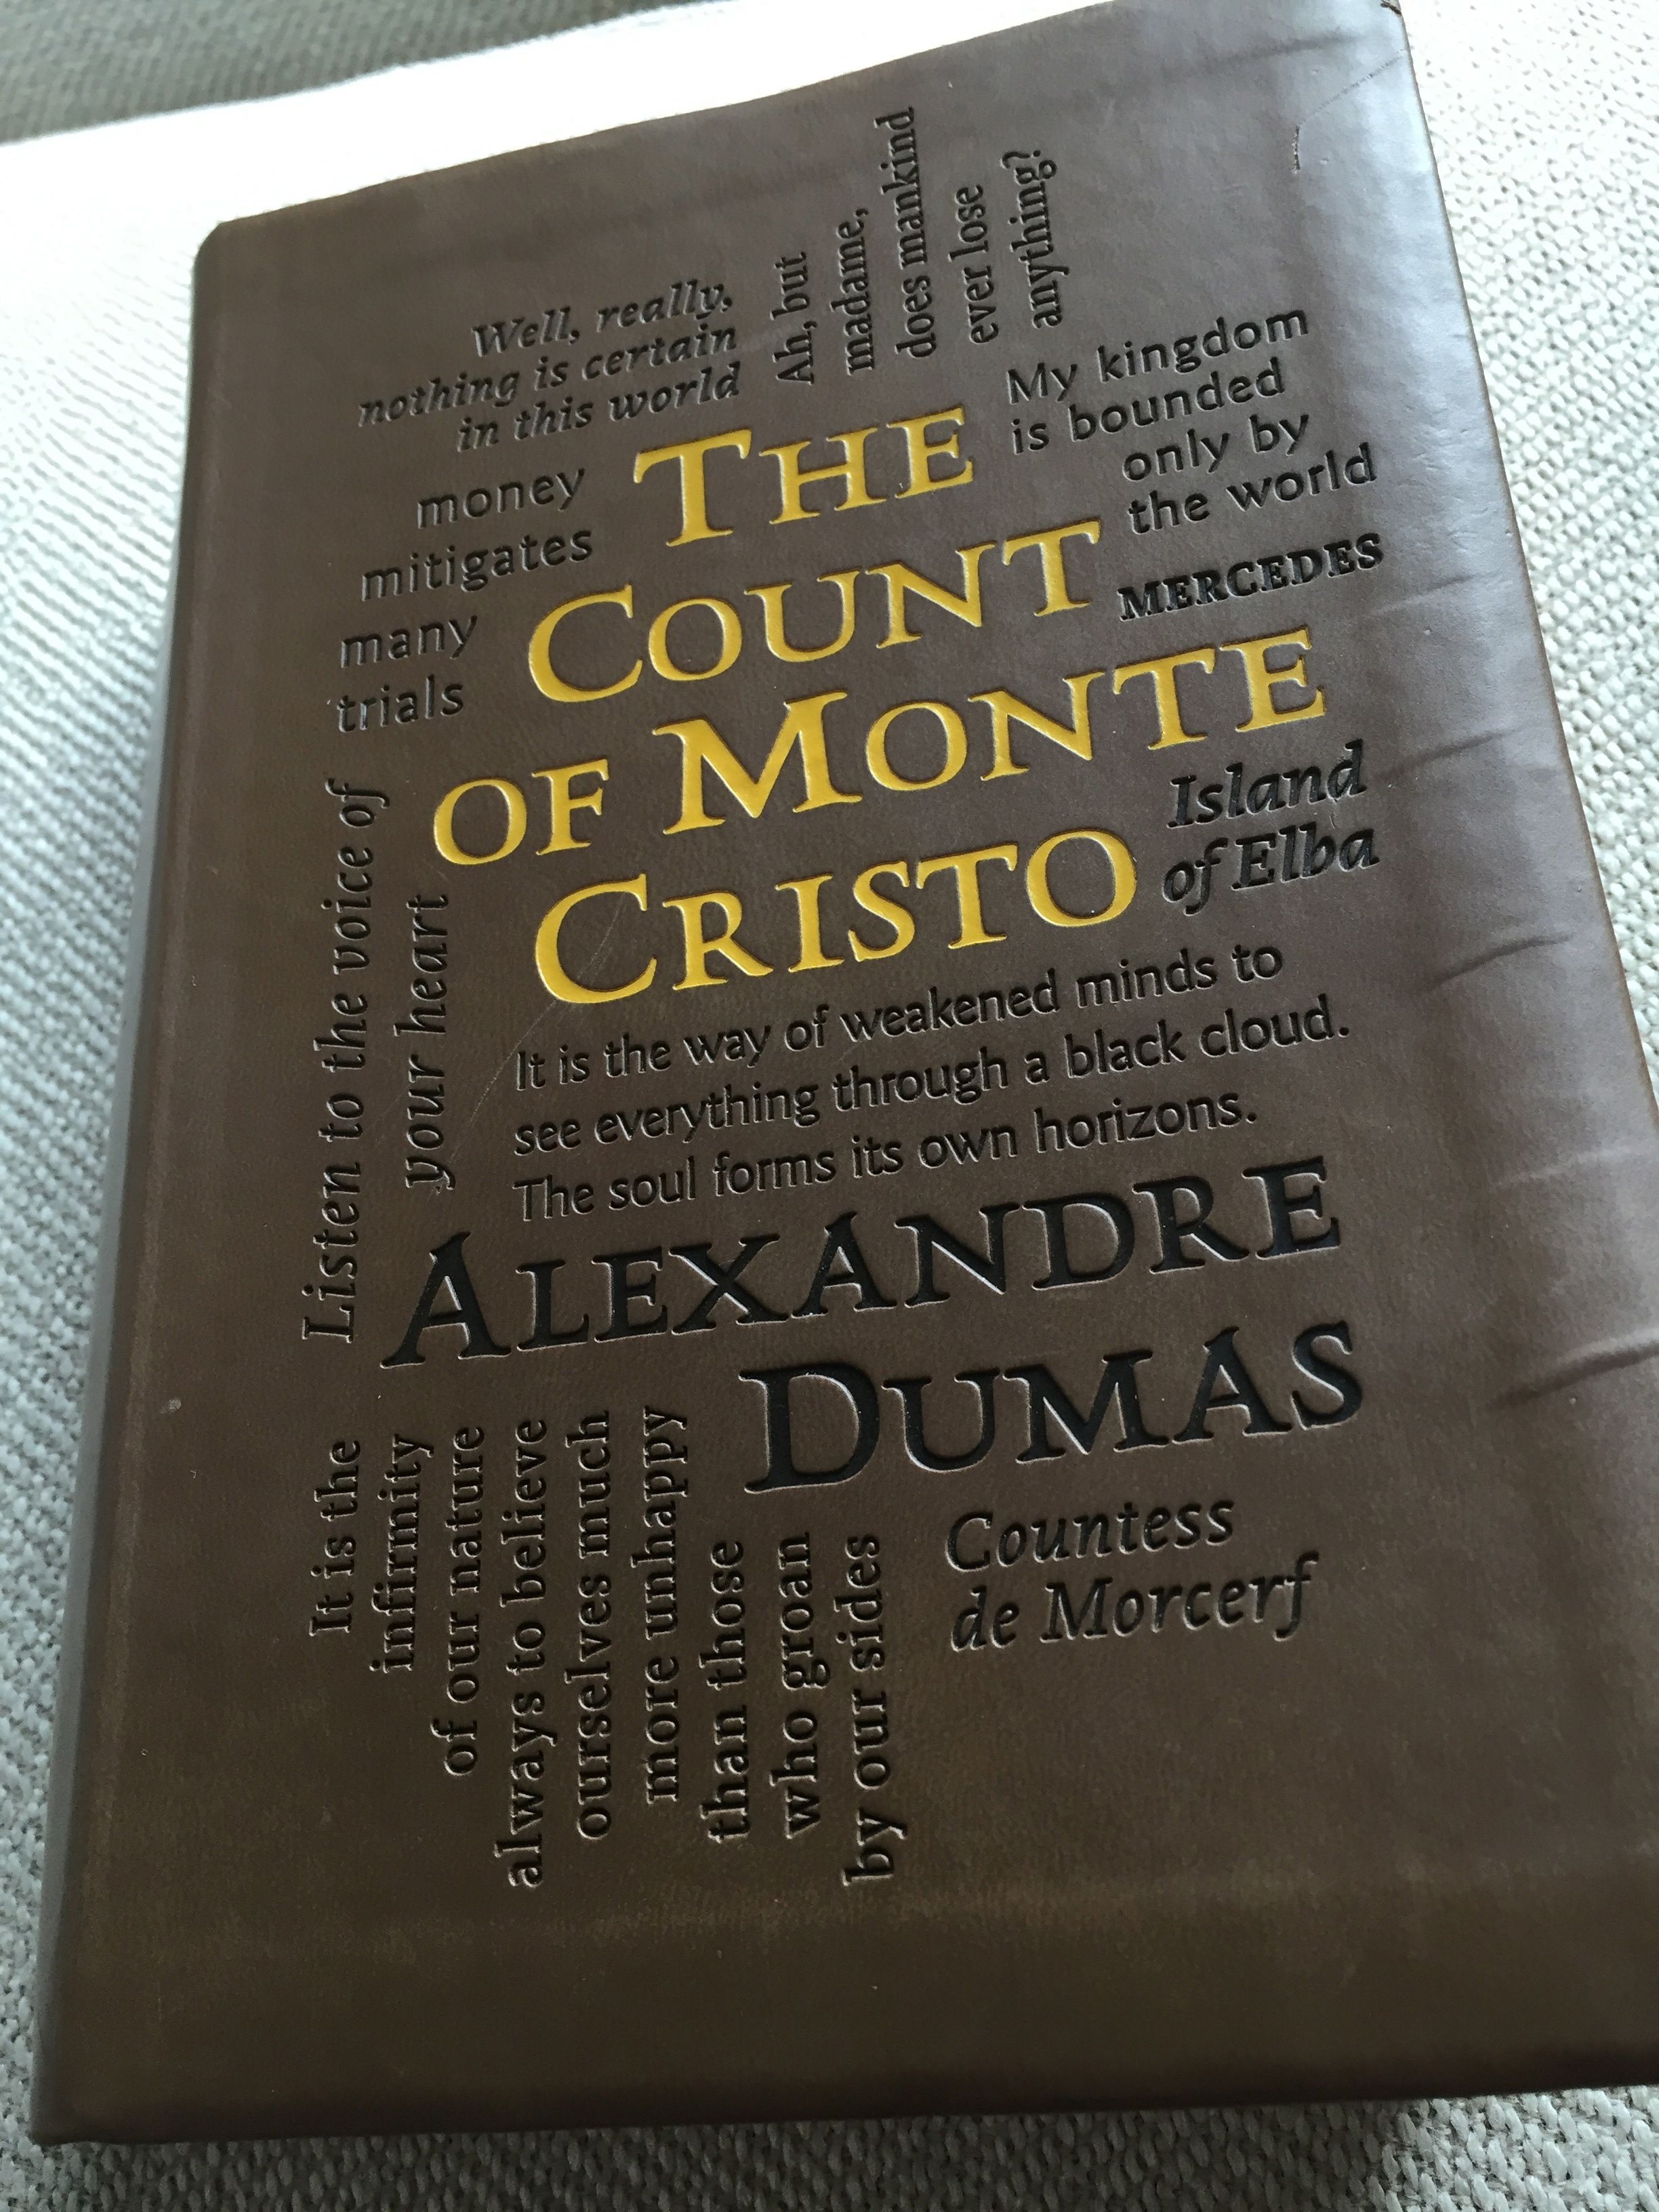 The Count of Monte Cristo, which I just finished